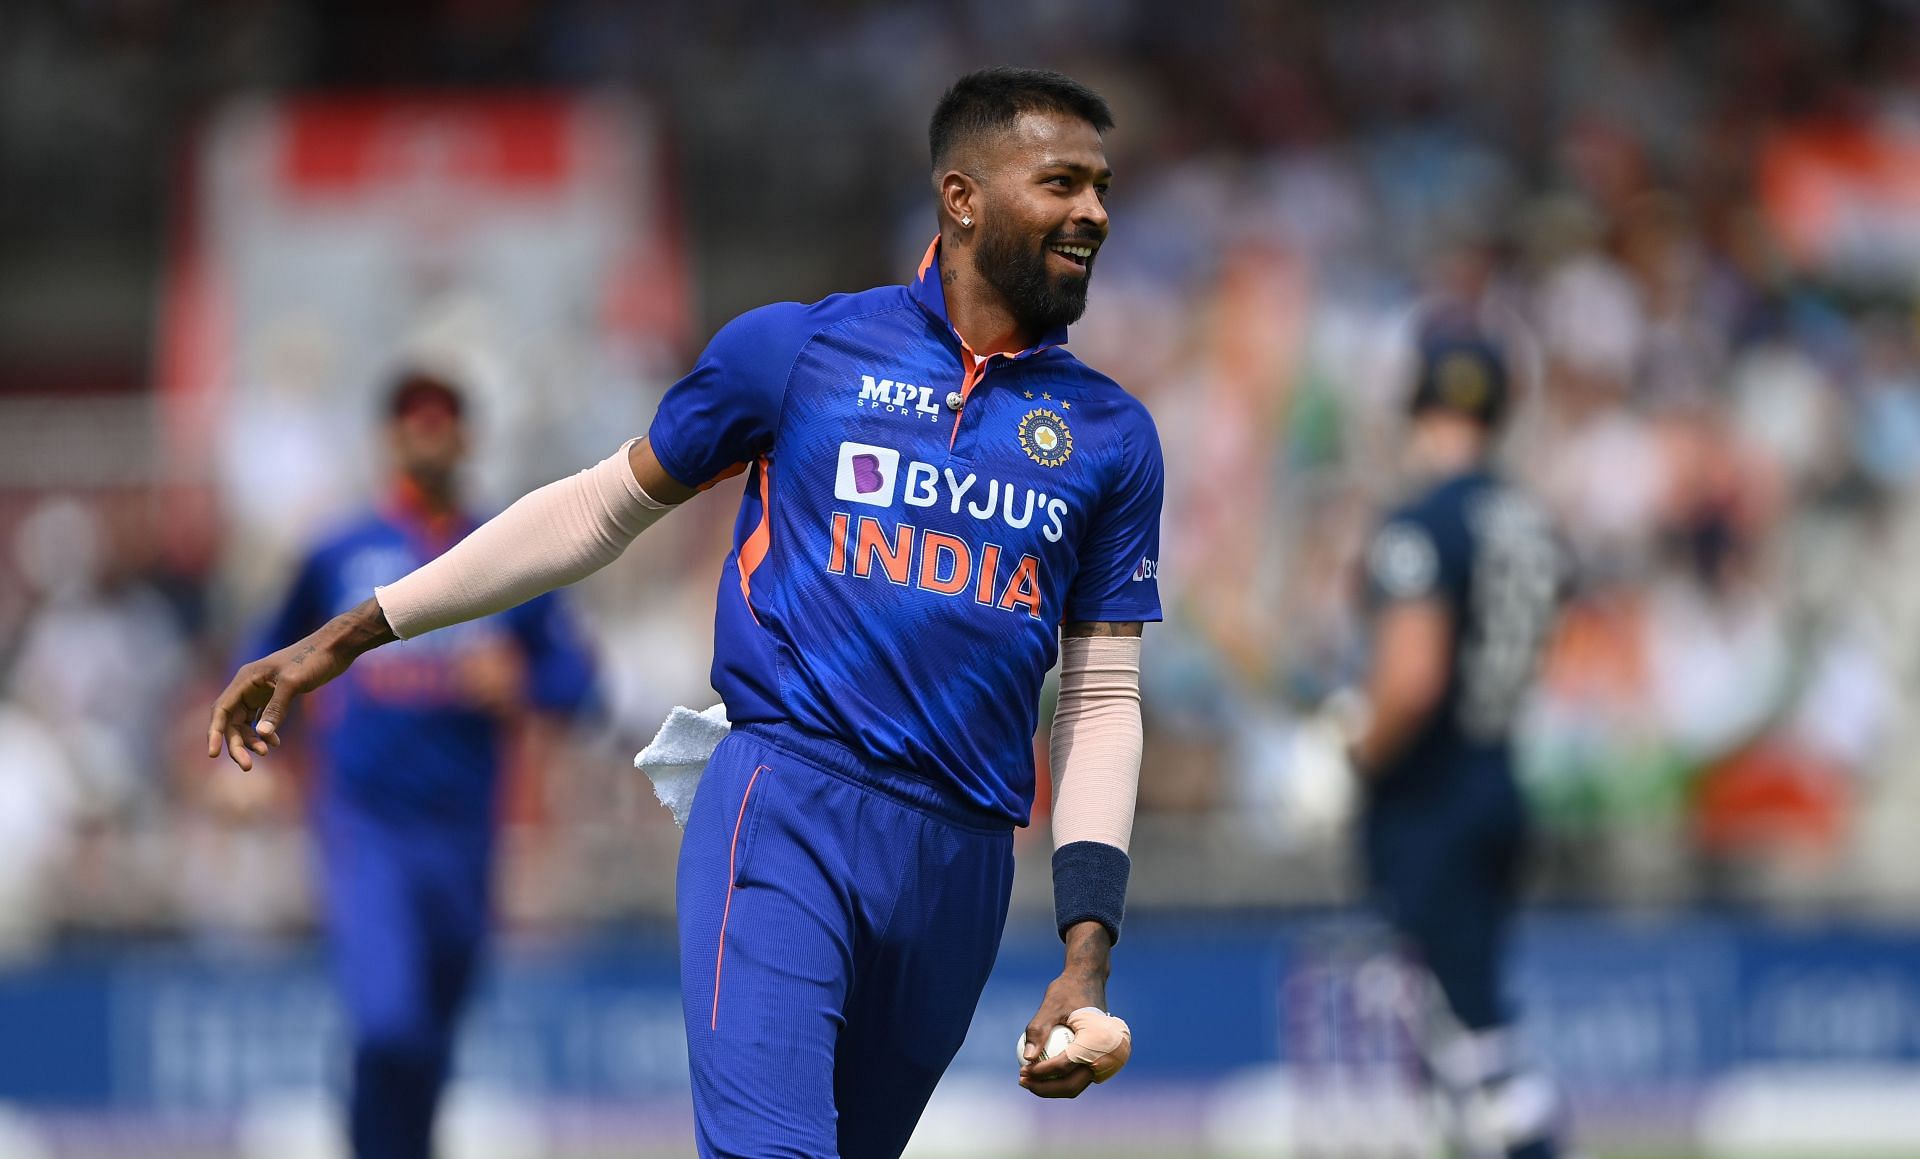 NZ vs IND T20I Series 2022 Full schedule, squads, match timings, telecast and live streaming details